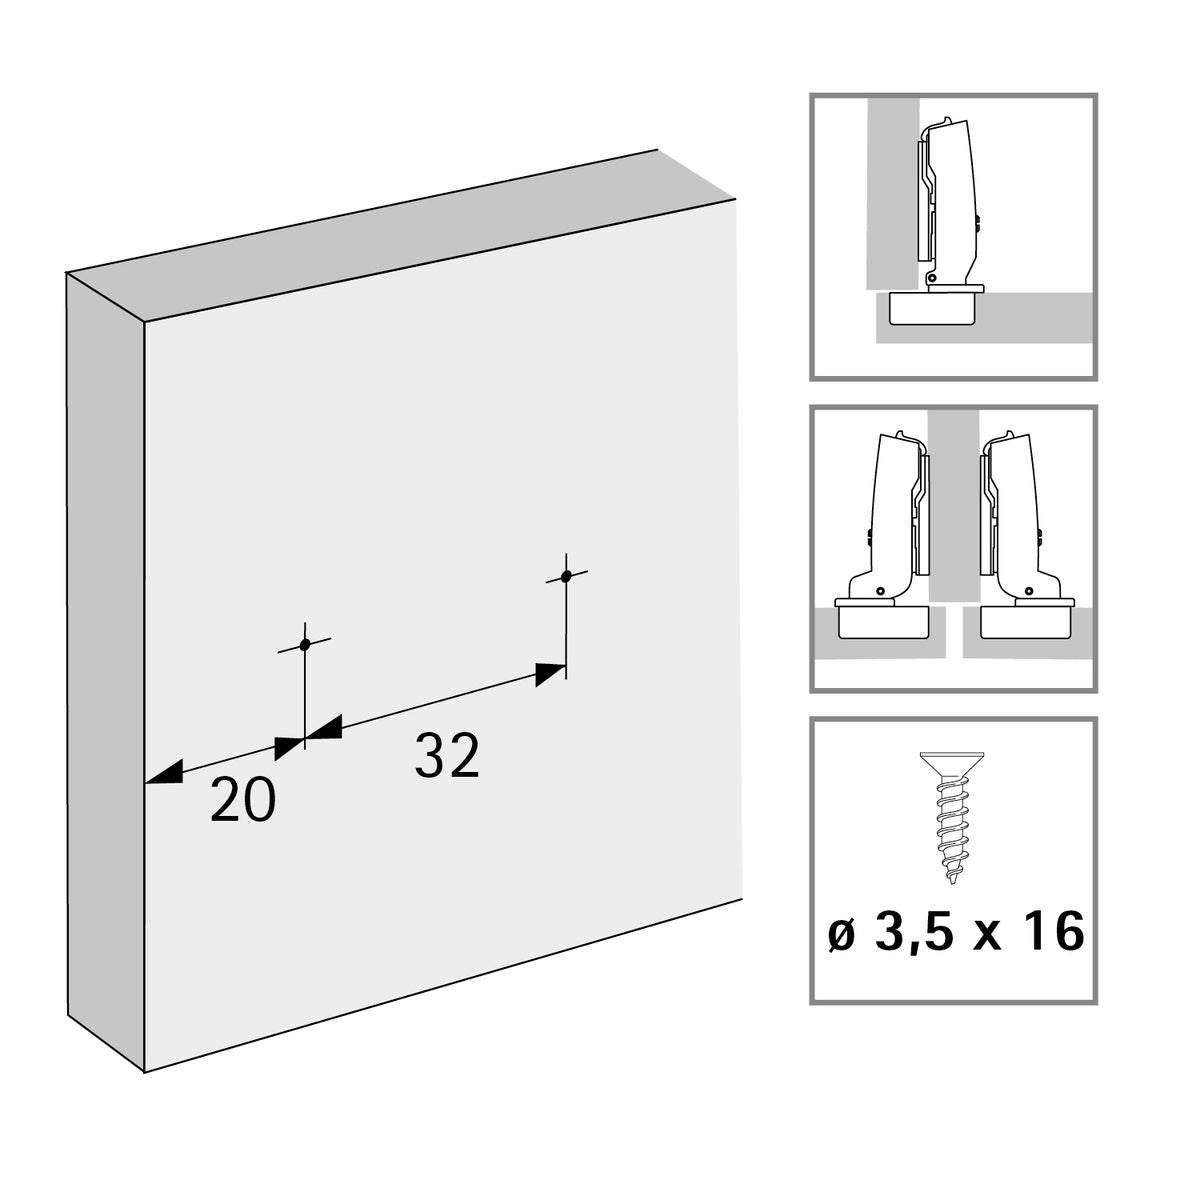 Hettich Linear mounting plate with Direct height adjustment